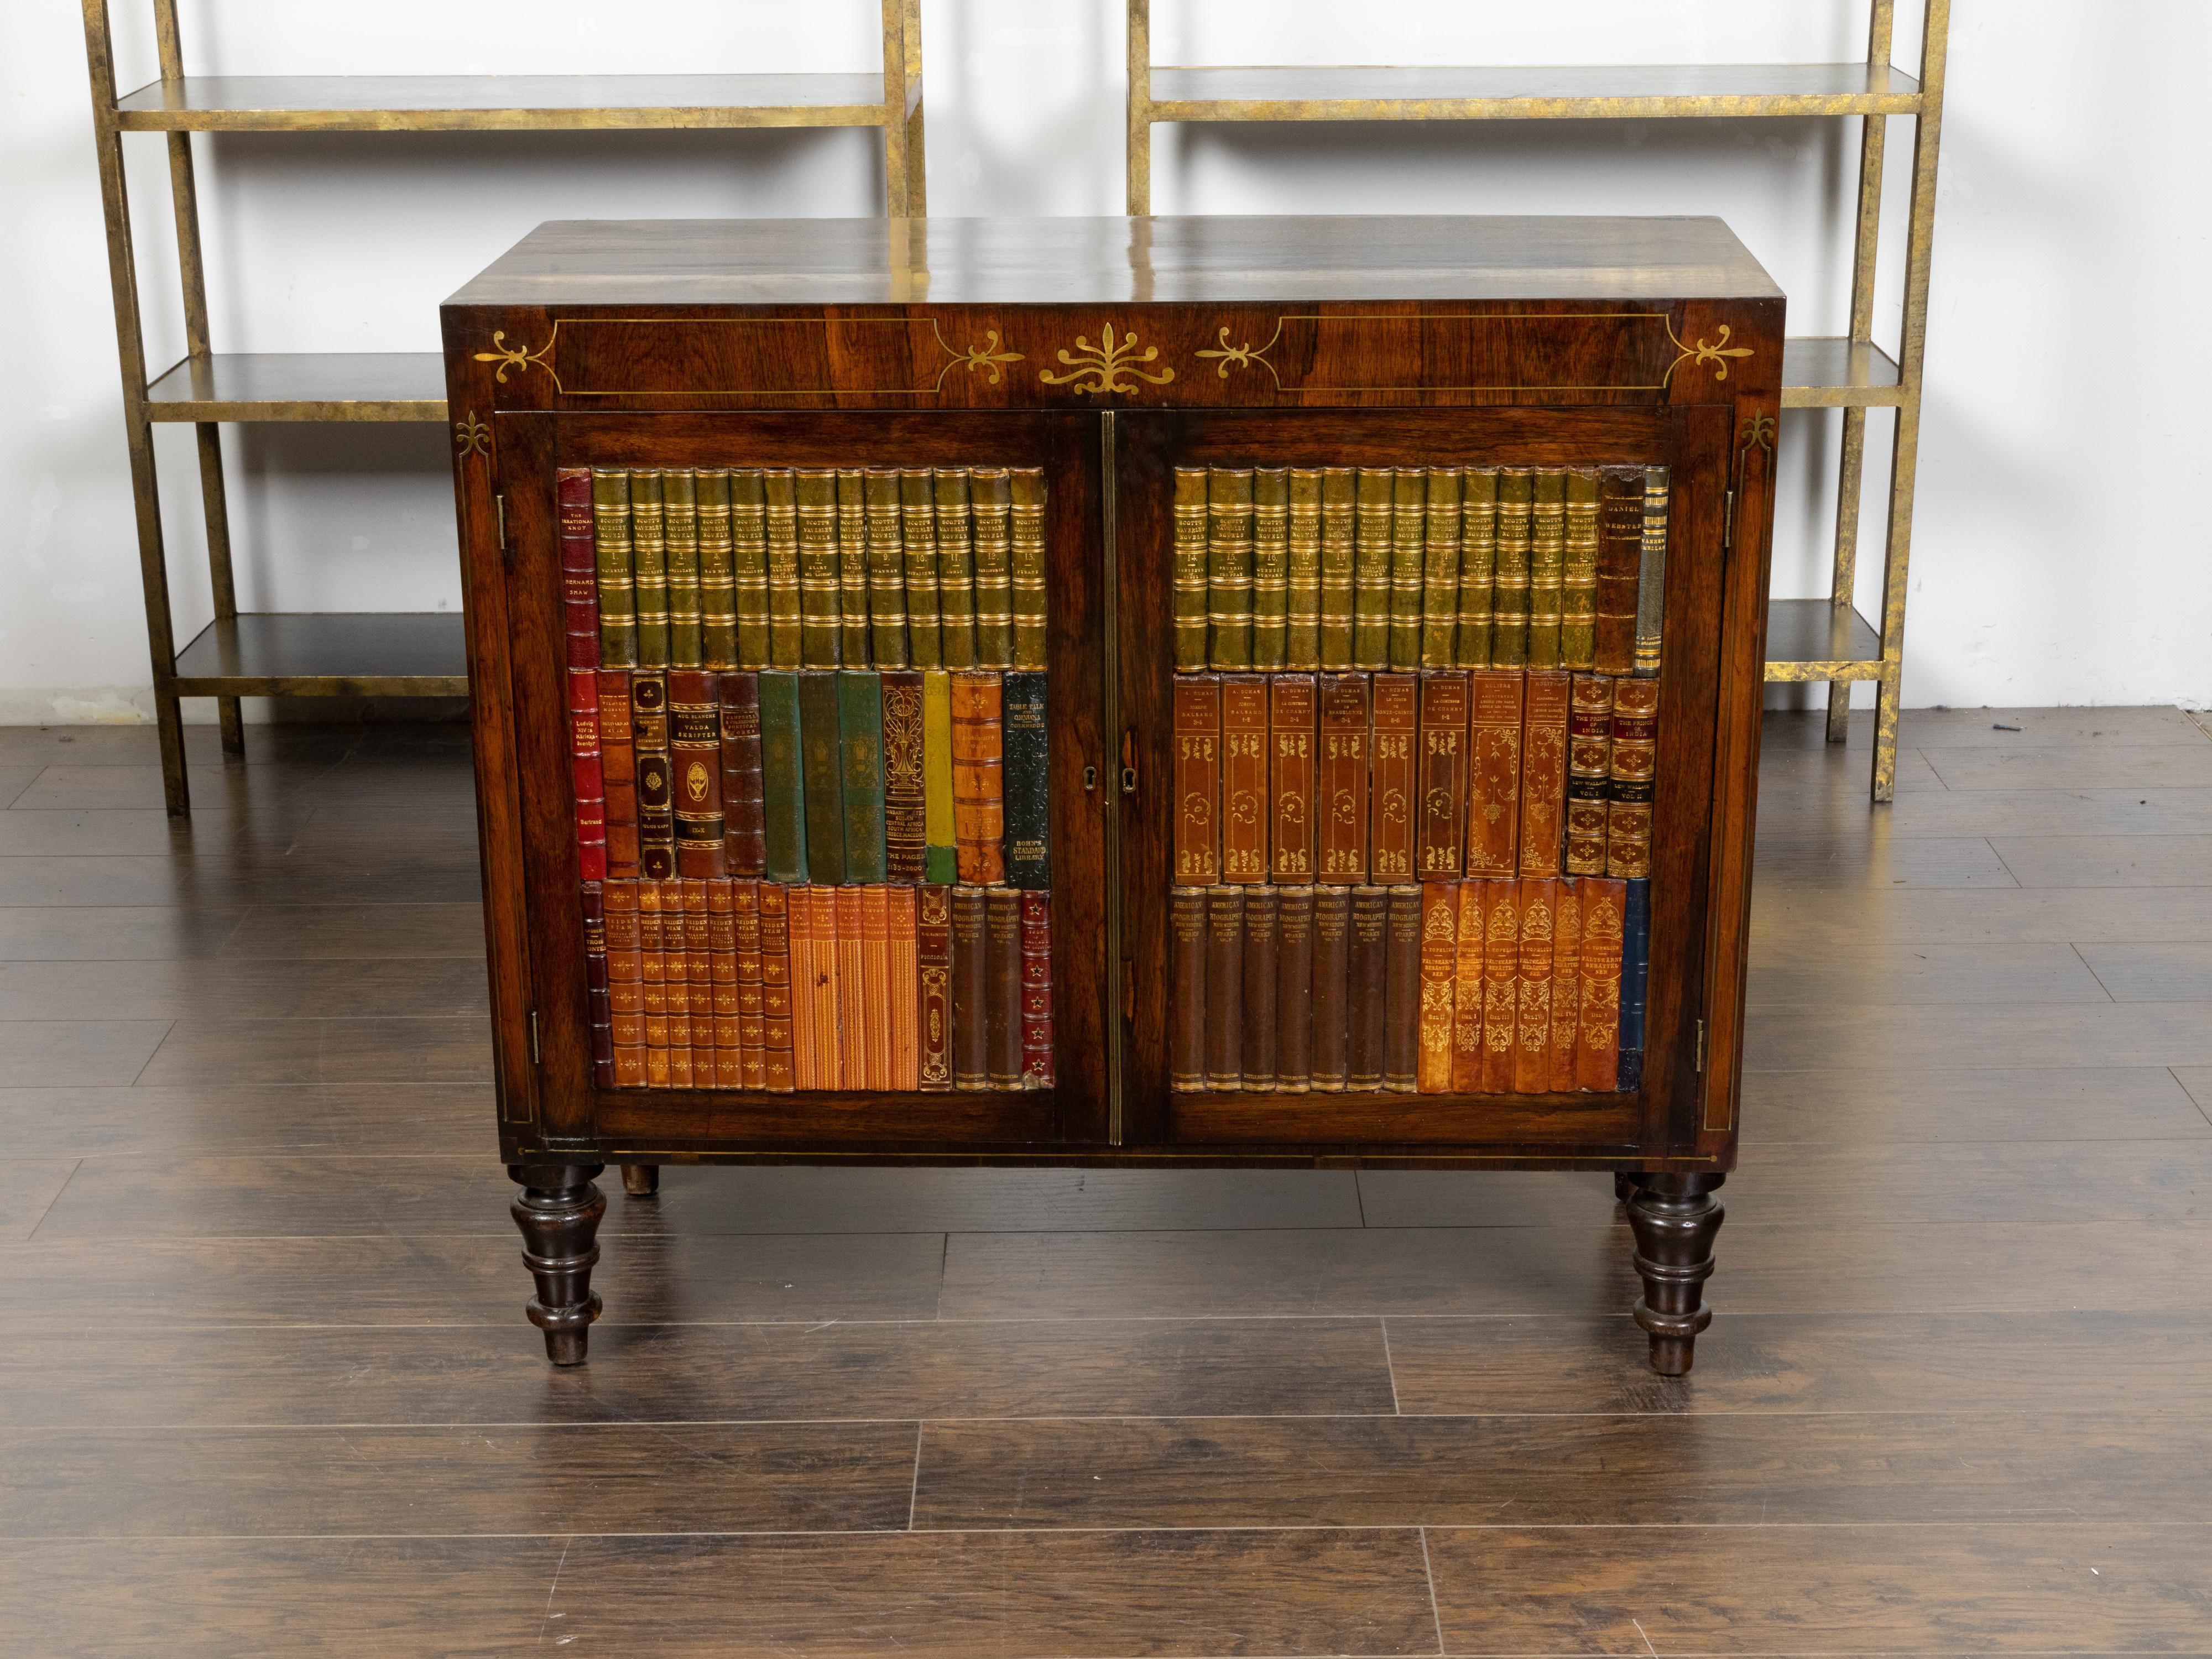 An English mahogany faux book cabinet from the mid 19th century, with foliage décor, brass inlay and turned feet. Created in England during the second quarter of the 19th century, this mahogany cabinet features a varnished rectangular top sitting